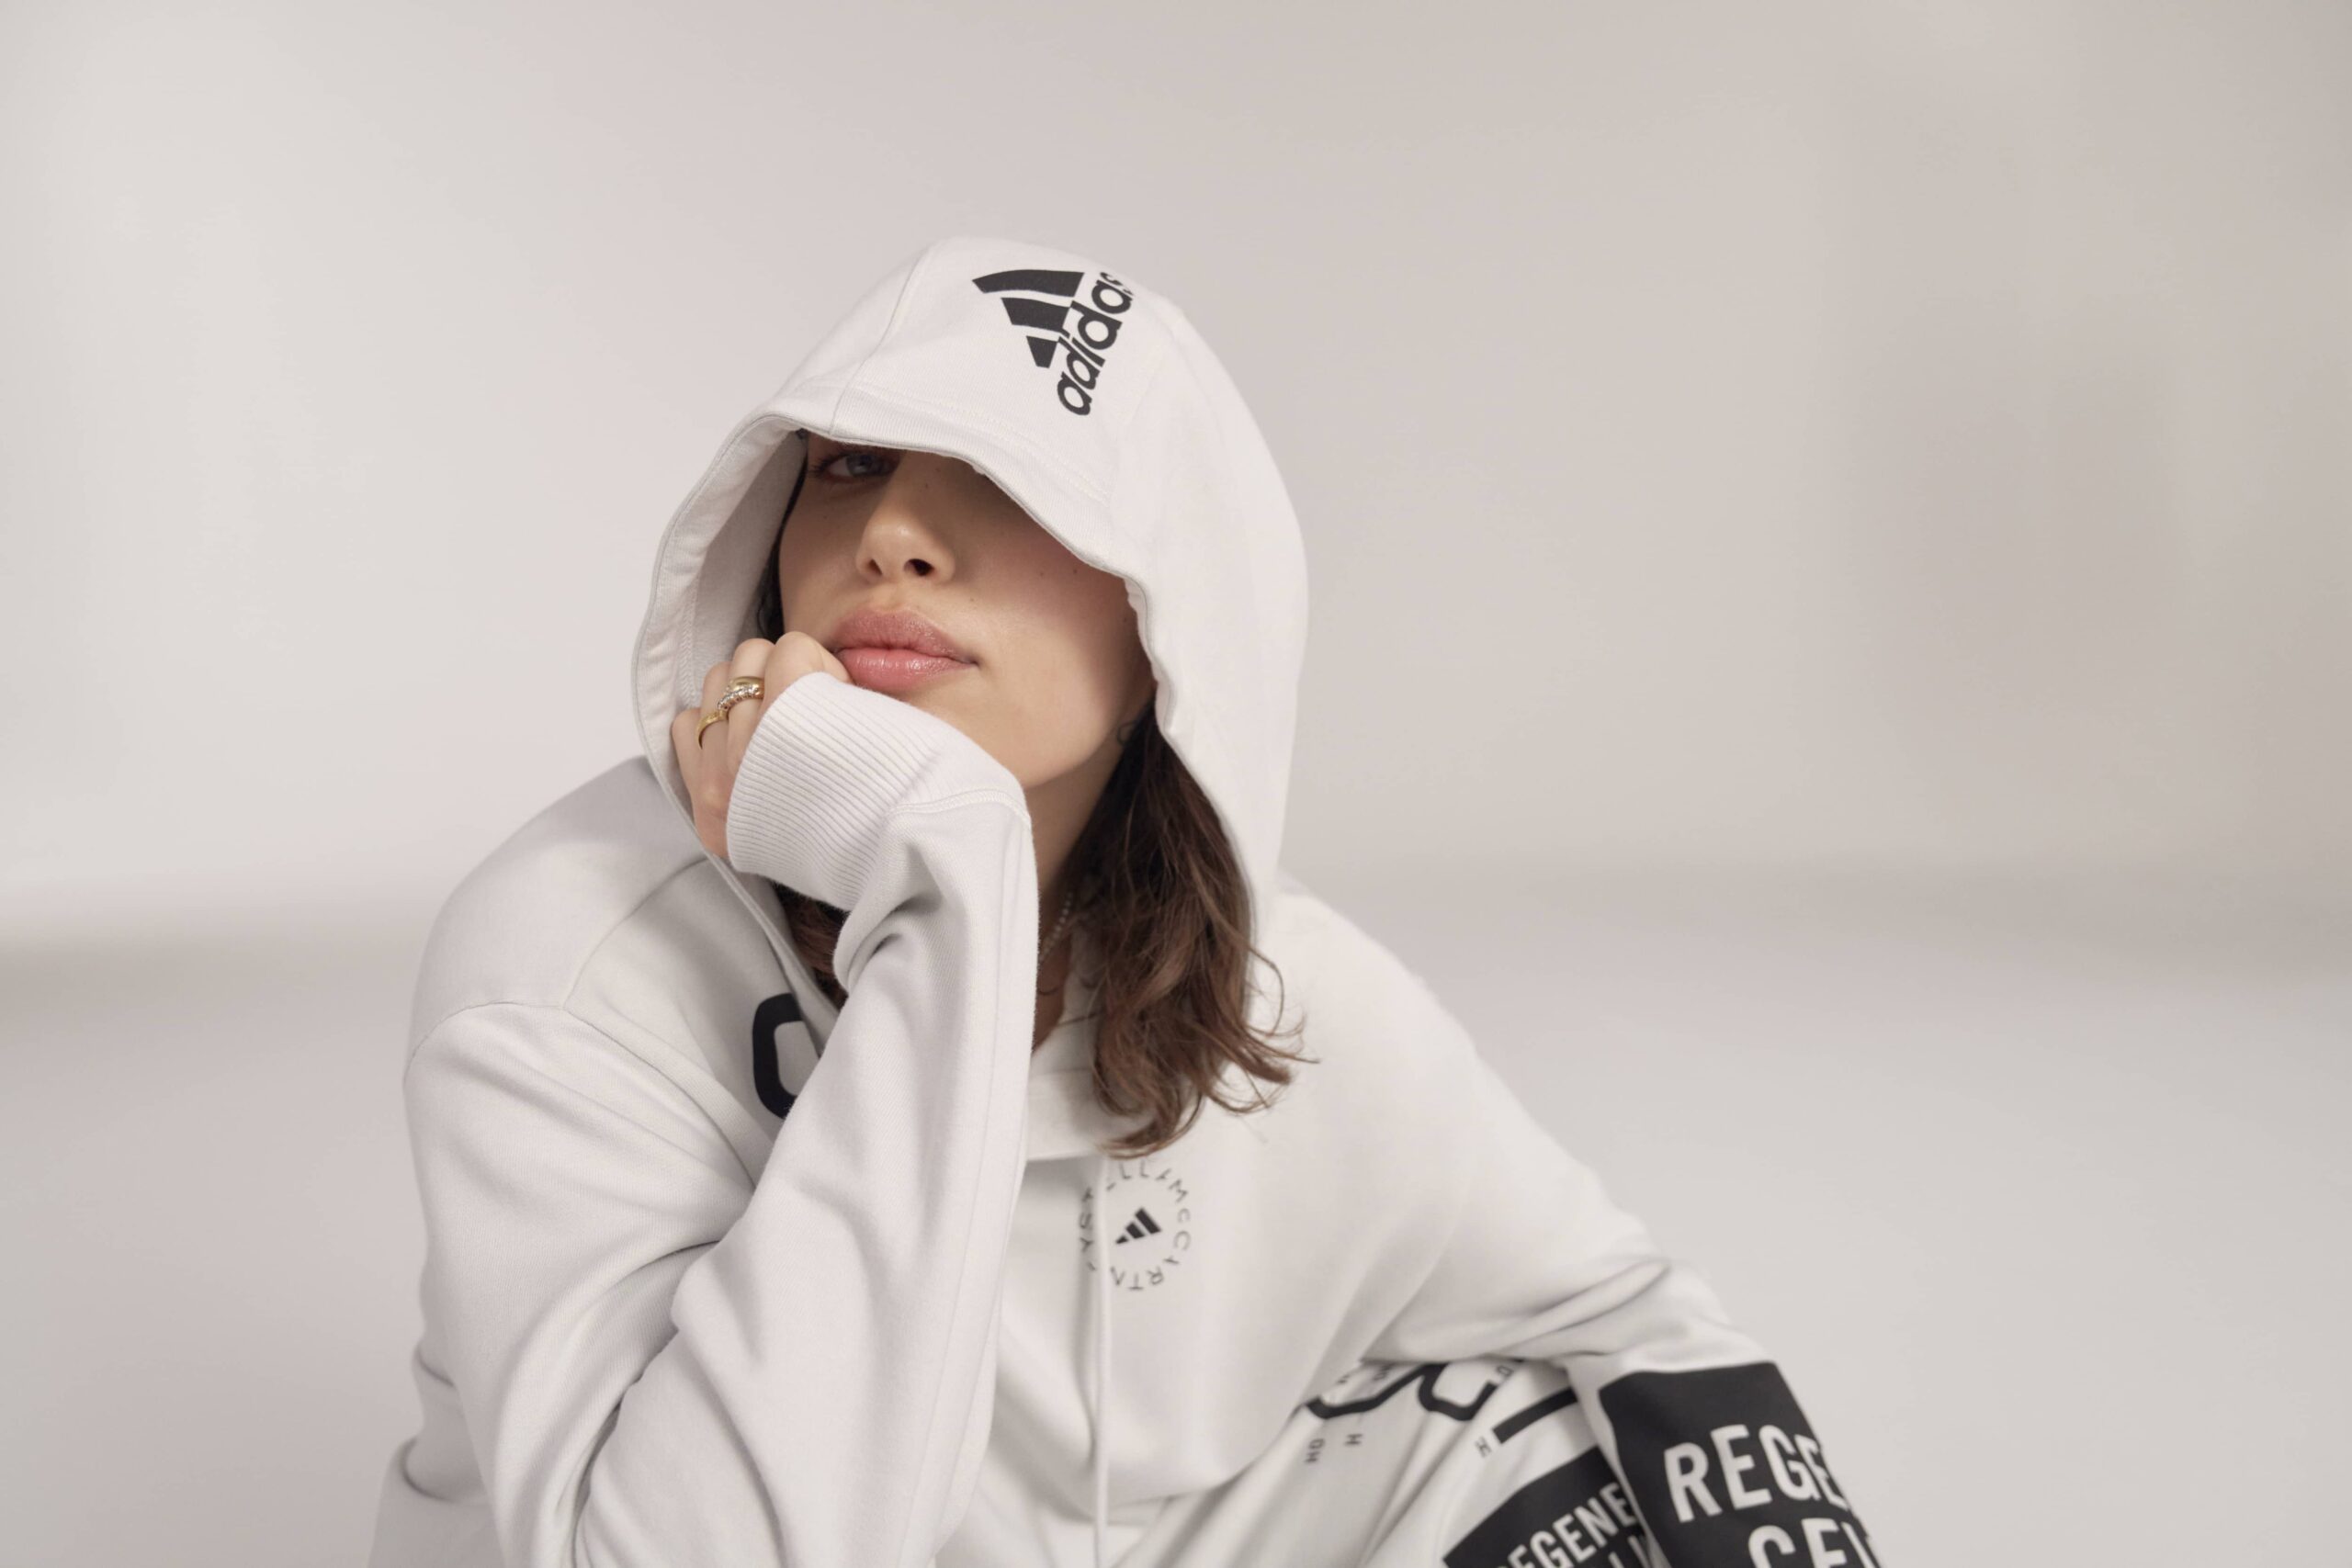 Adidas by stella mccartney unveil industry-first, with viscose sportswear